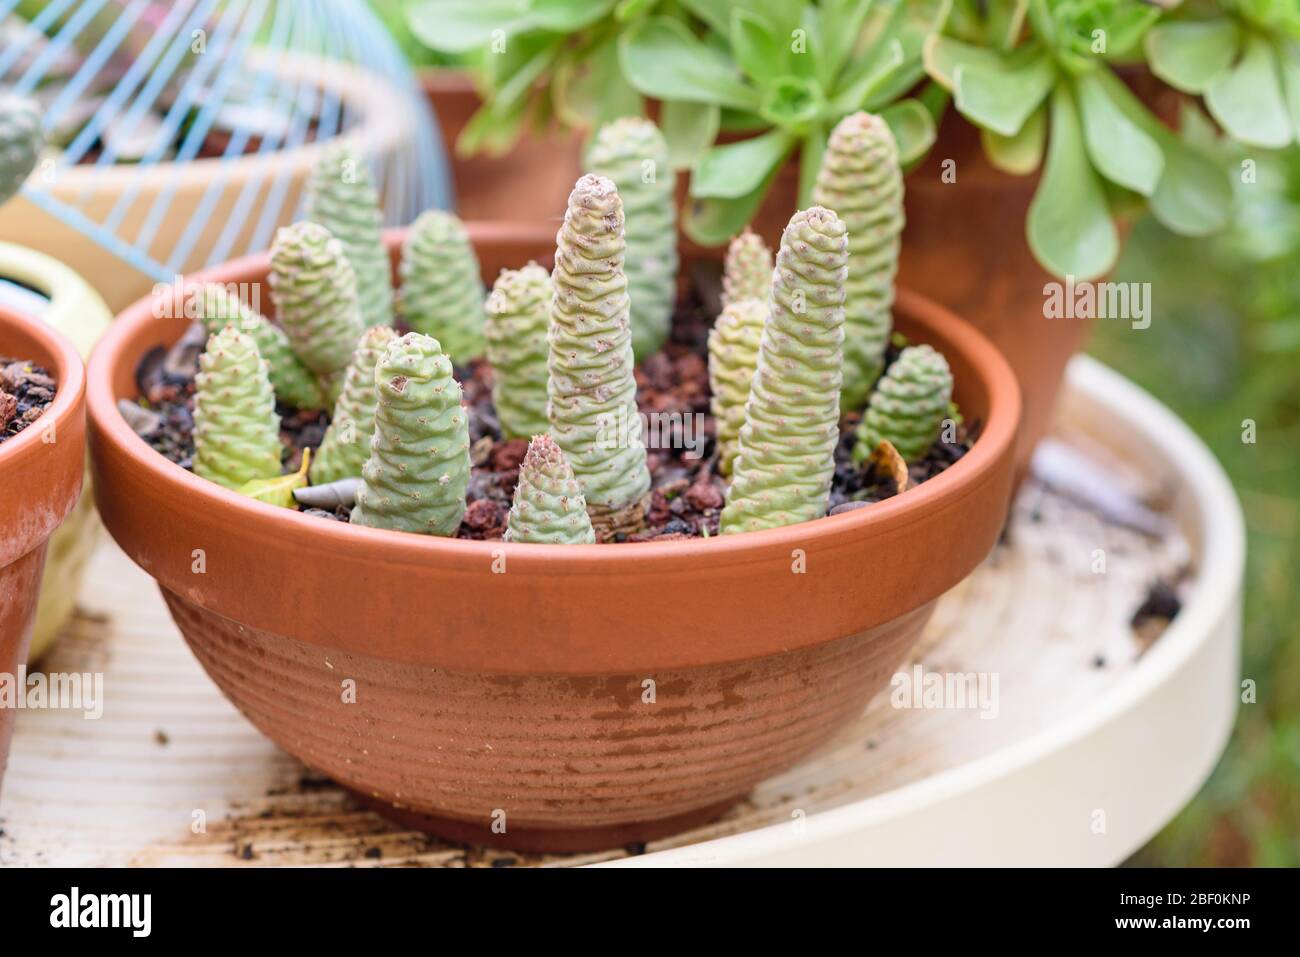 Group of tephrocactus succulent plants at homemade stand in a sunny garden. Stock Photo